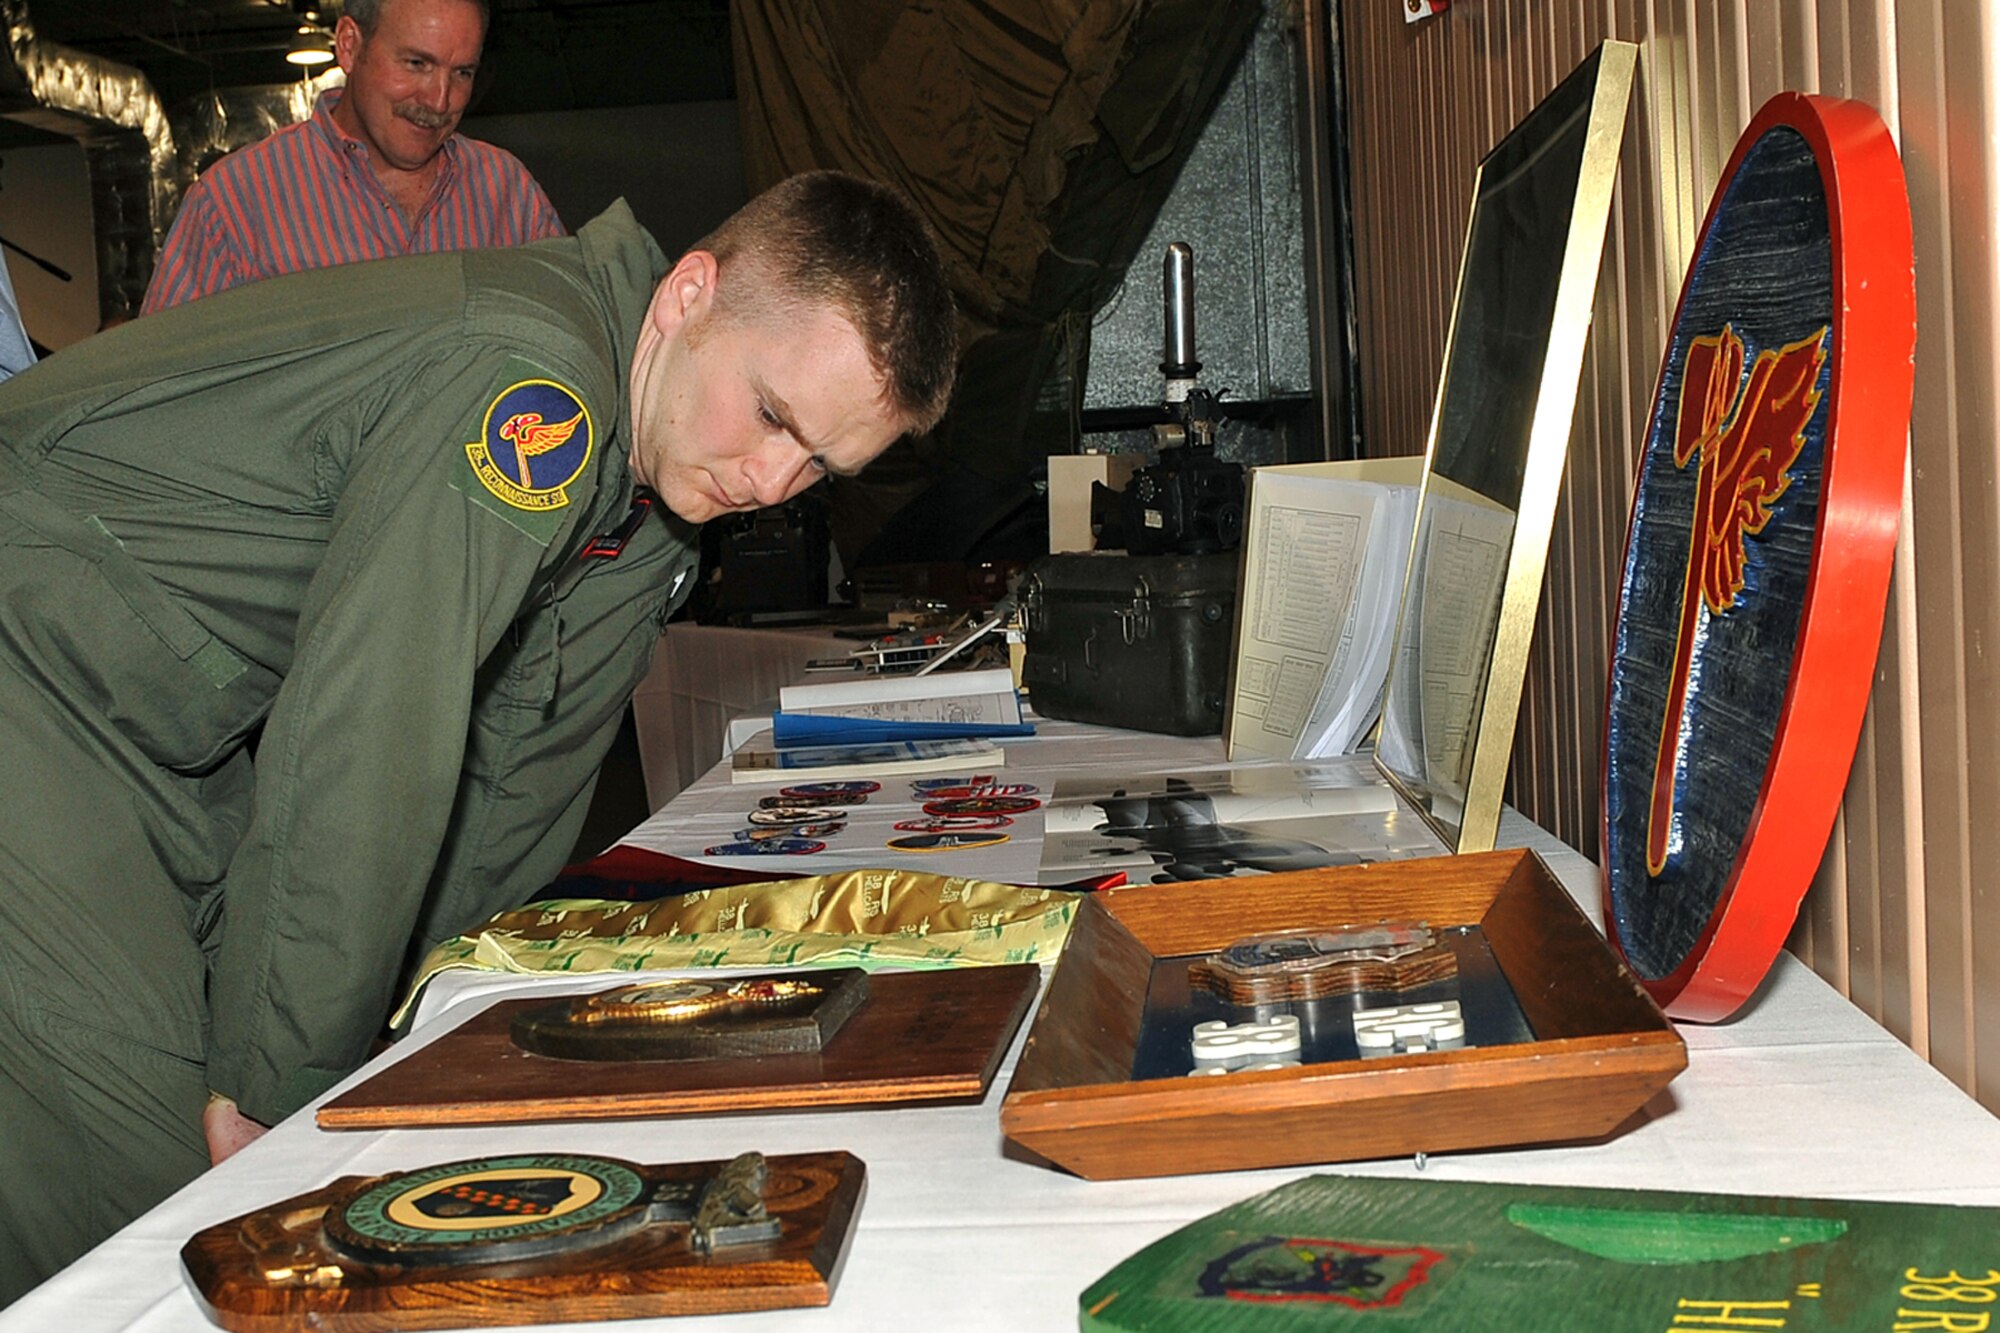 OFFUTT AIR FORCE BASE, Neb. - Staff Sgt. Sean Carter, with the 38th Reconnaissance Squadron, looks over some of the 38th RS history on display during the Tales of the 55th event at the James M. McCoy Airman Leadership School building April 9, 2010. The event held in conjunction with the 55th Wing Heritage Week, gave Team Offutt a chance to reflect on its heritage and hear stories from those who answered their nation call. U.S. Air Force photo by Charles Haymond